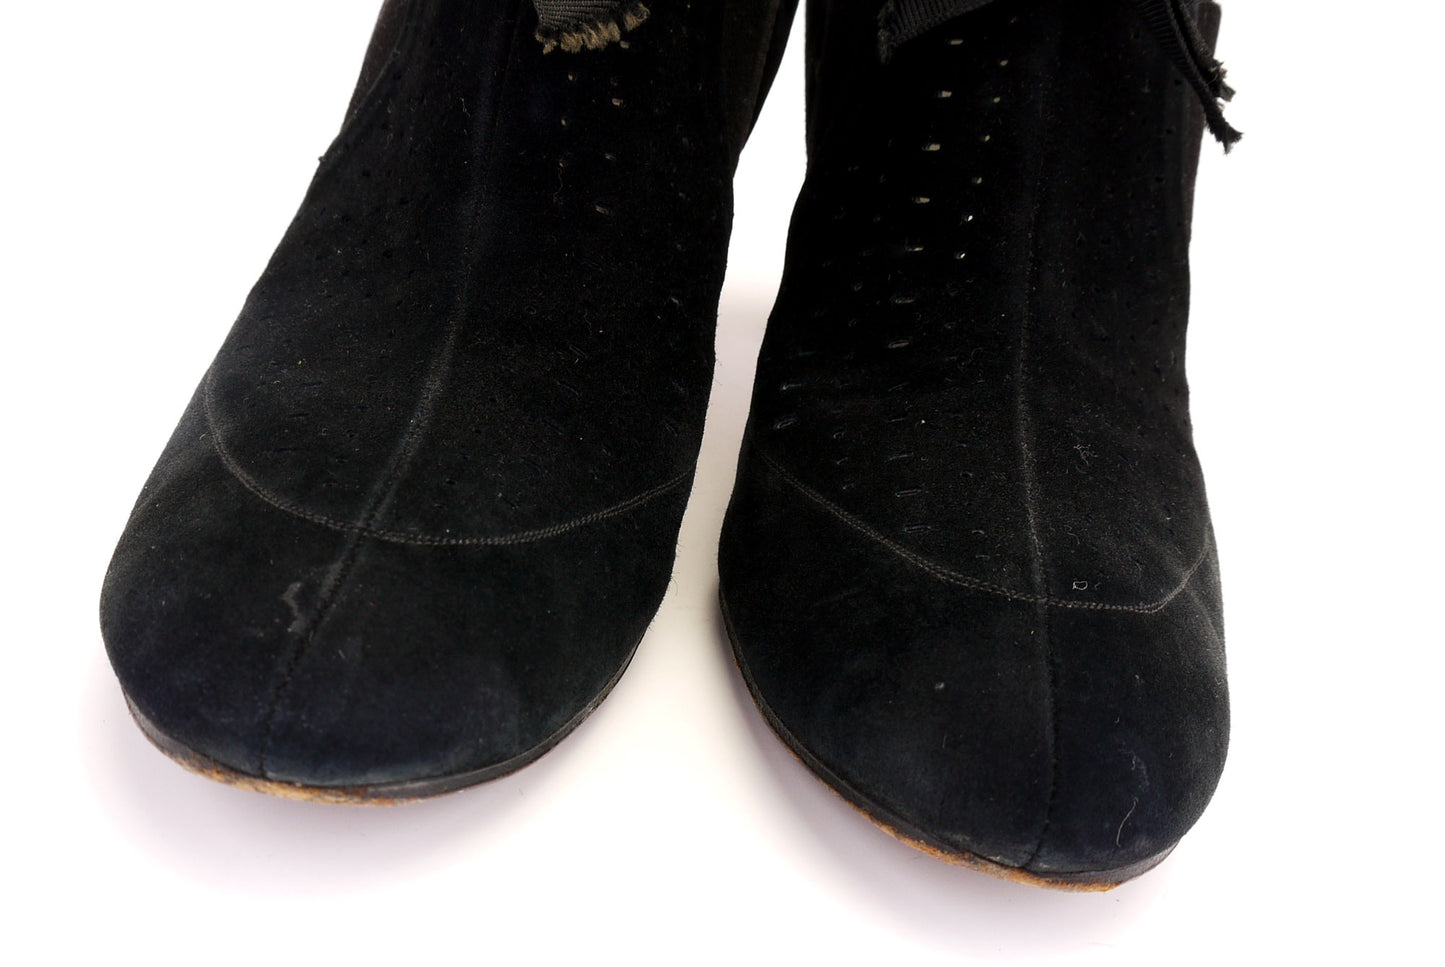 1930s Black Suede Perforated Pumps by Naturaliser UK 5.5